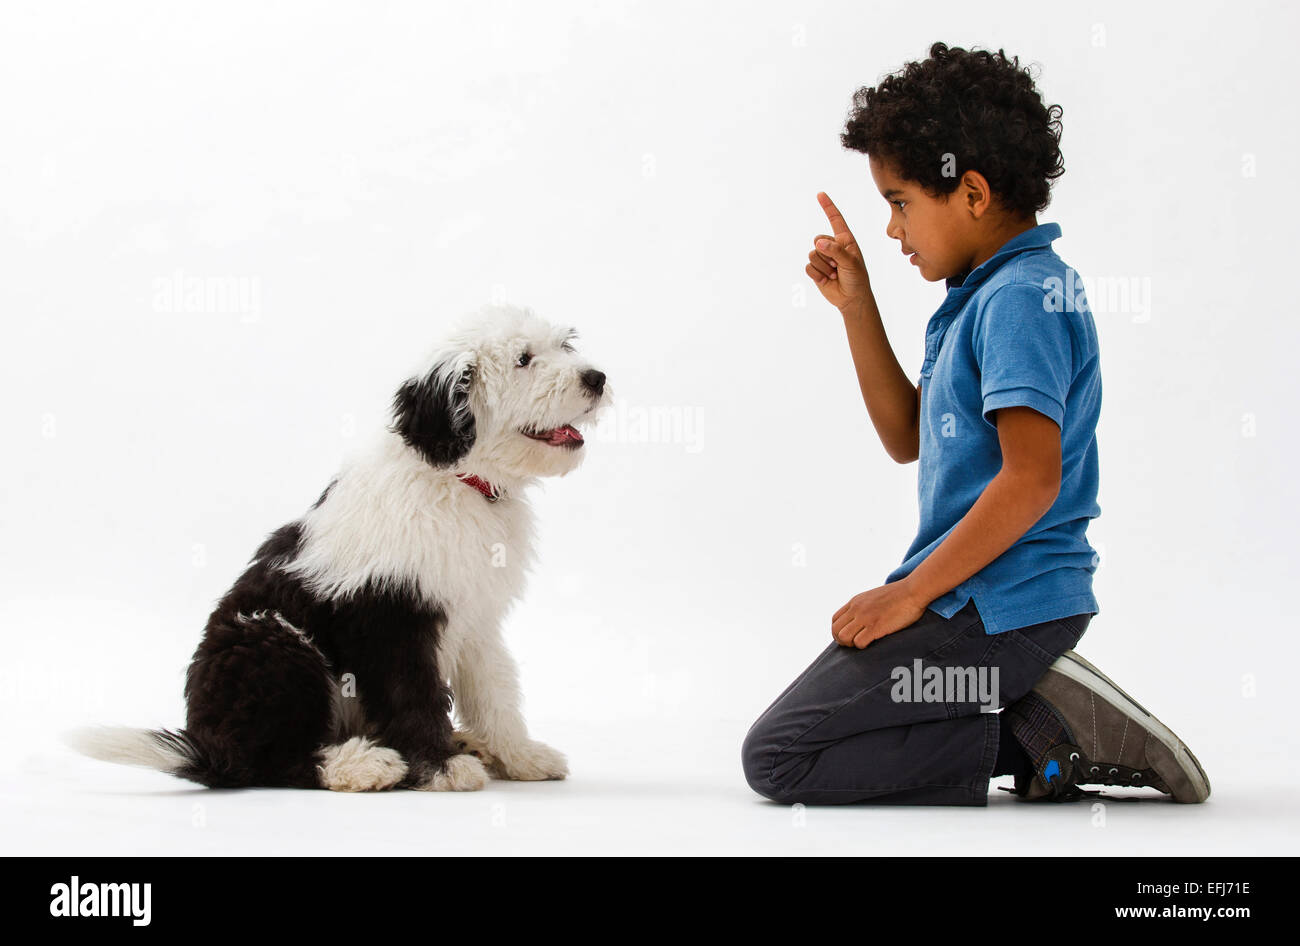 Boy, 8 years, training an Old English Sheepdog puppy, 4 months Stock Photo